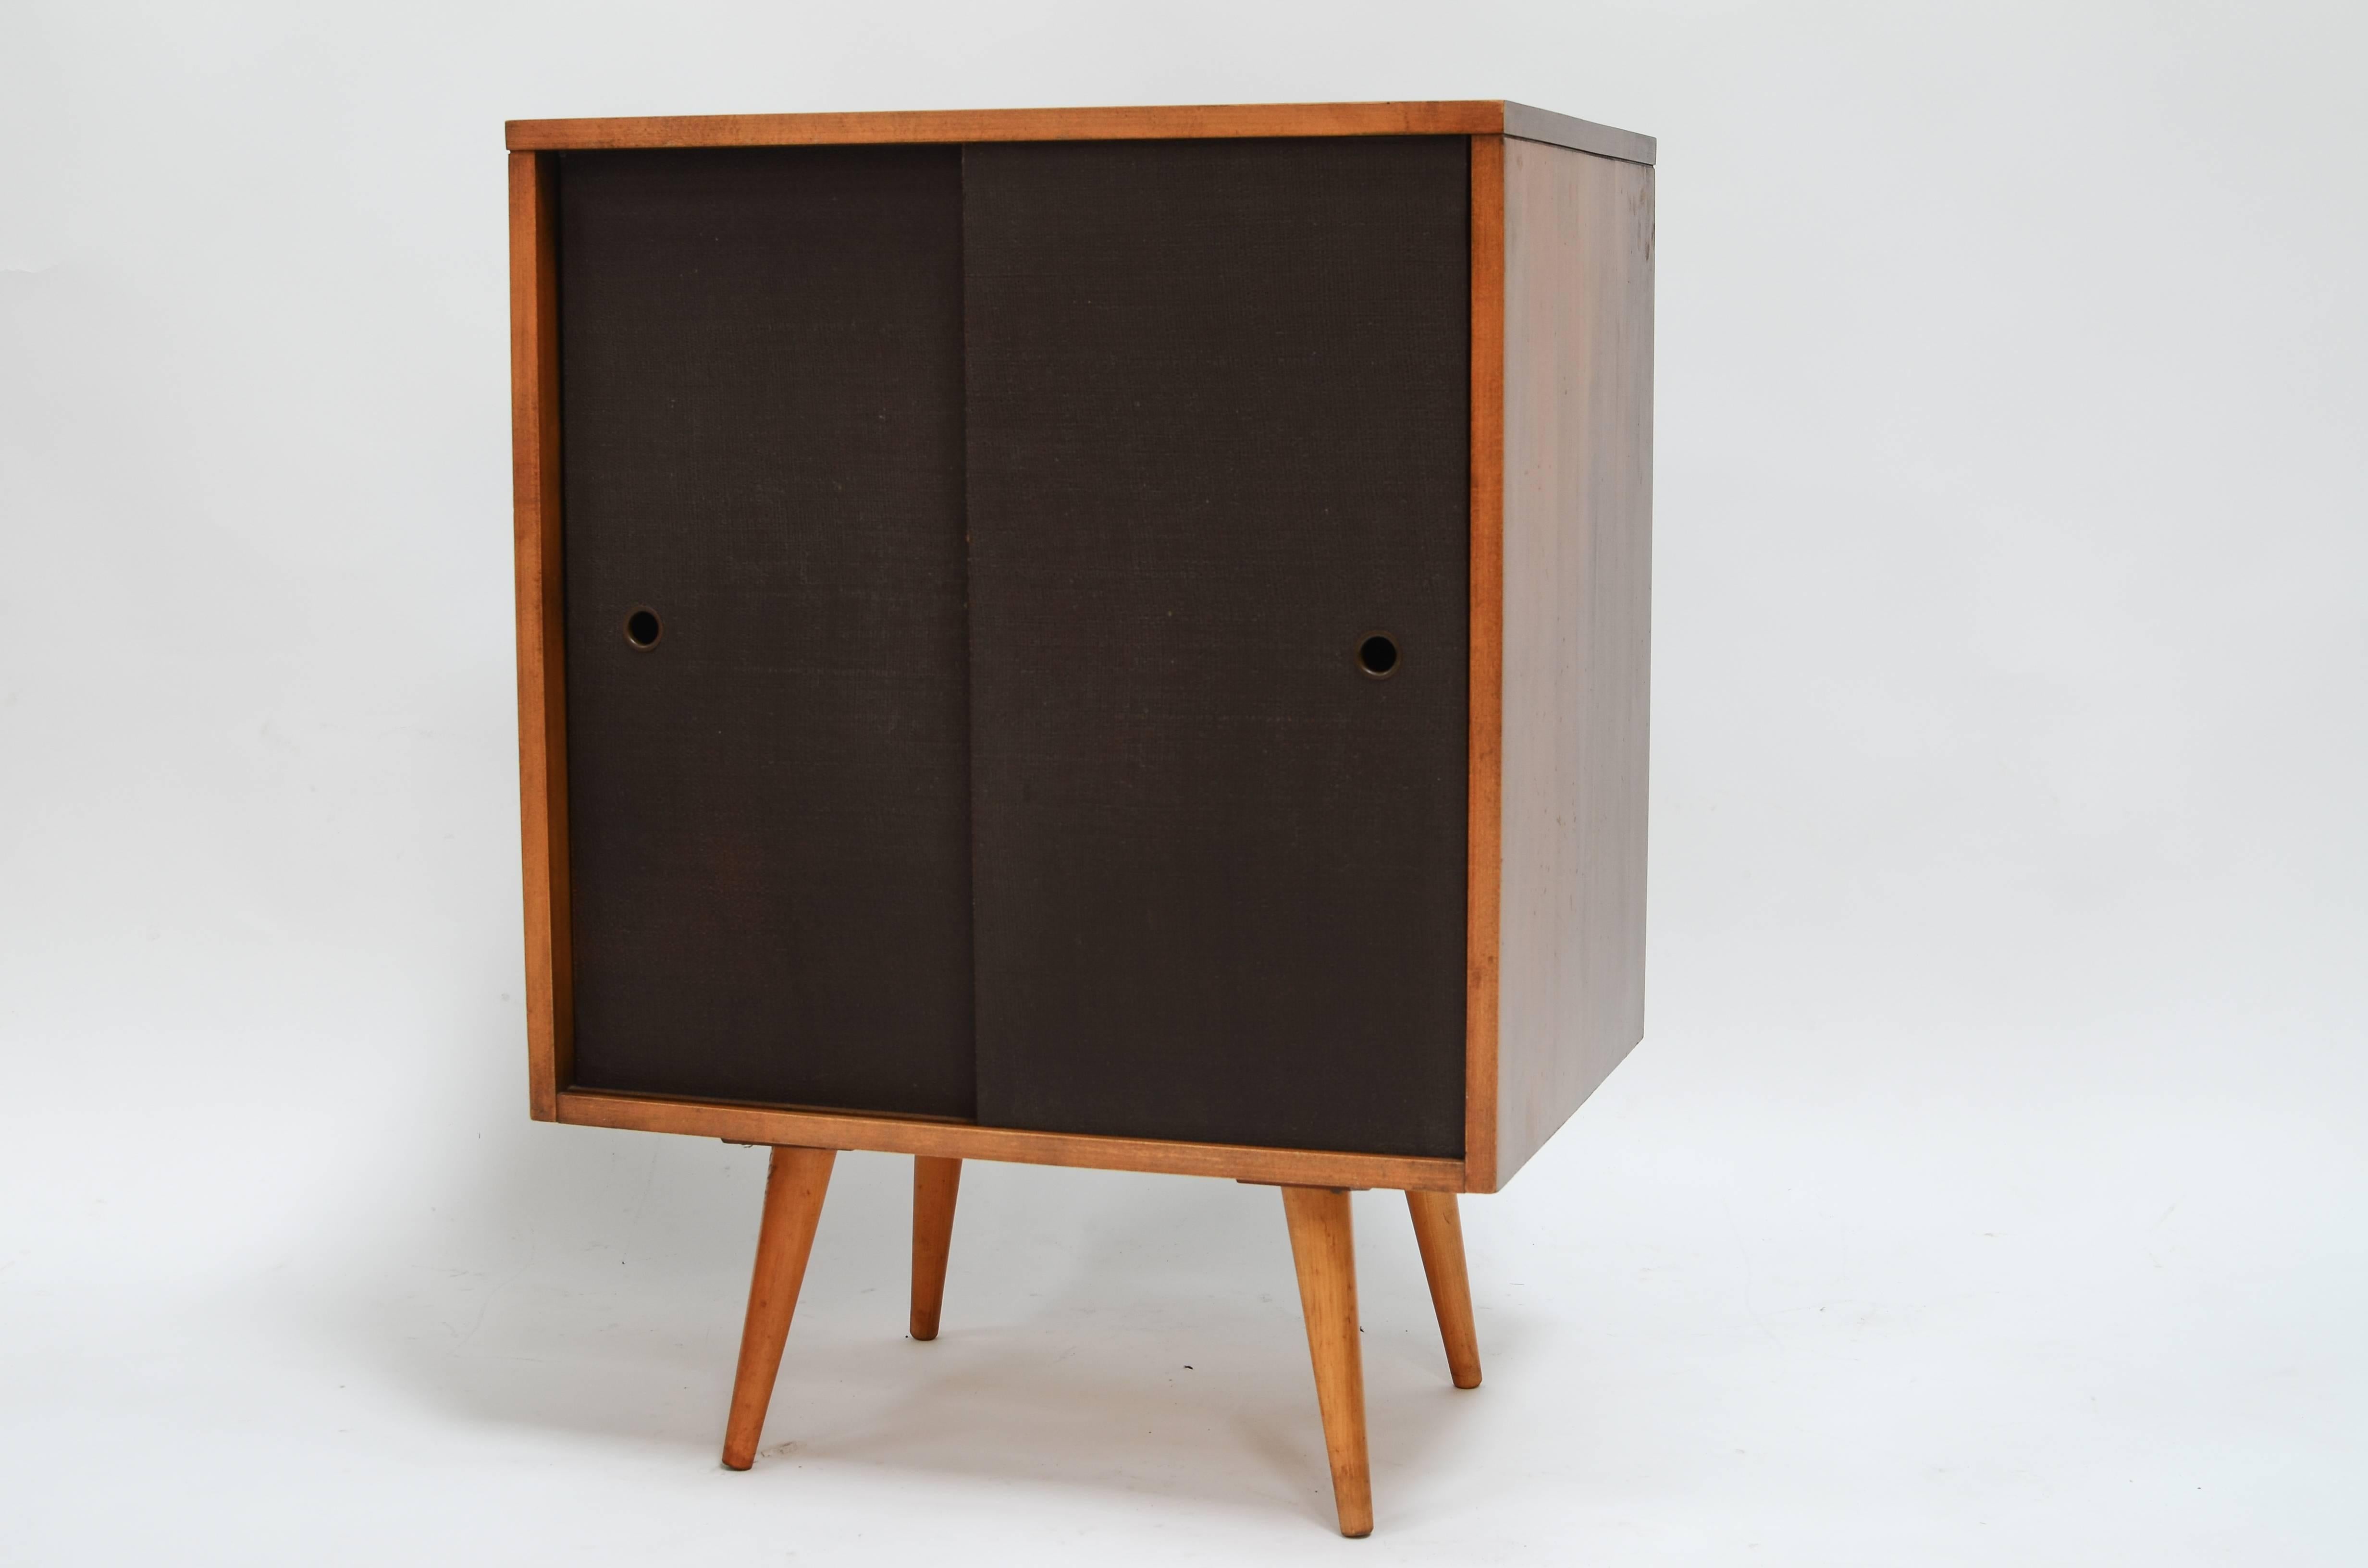 Stunning small grasscloth cabinet designed by Paul McCobb for the Planner Group, c1950s. All original condition with no damage. Signed with original designers label. 

McCobb's Planner Group, manufactured by Winchendon Furniture Company, was among